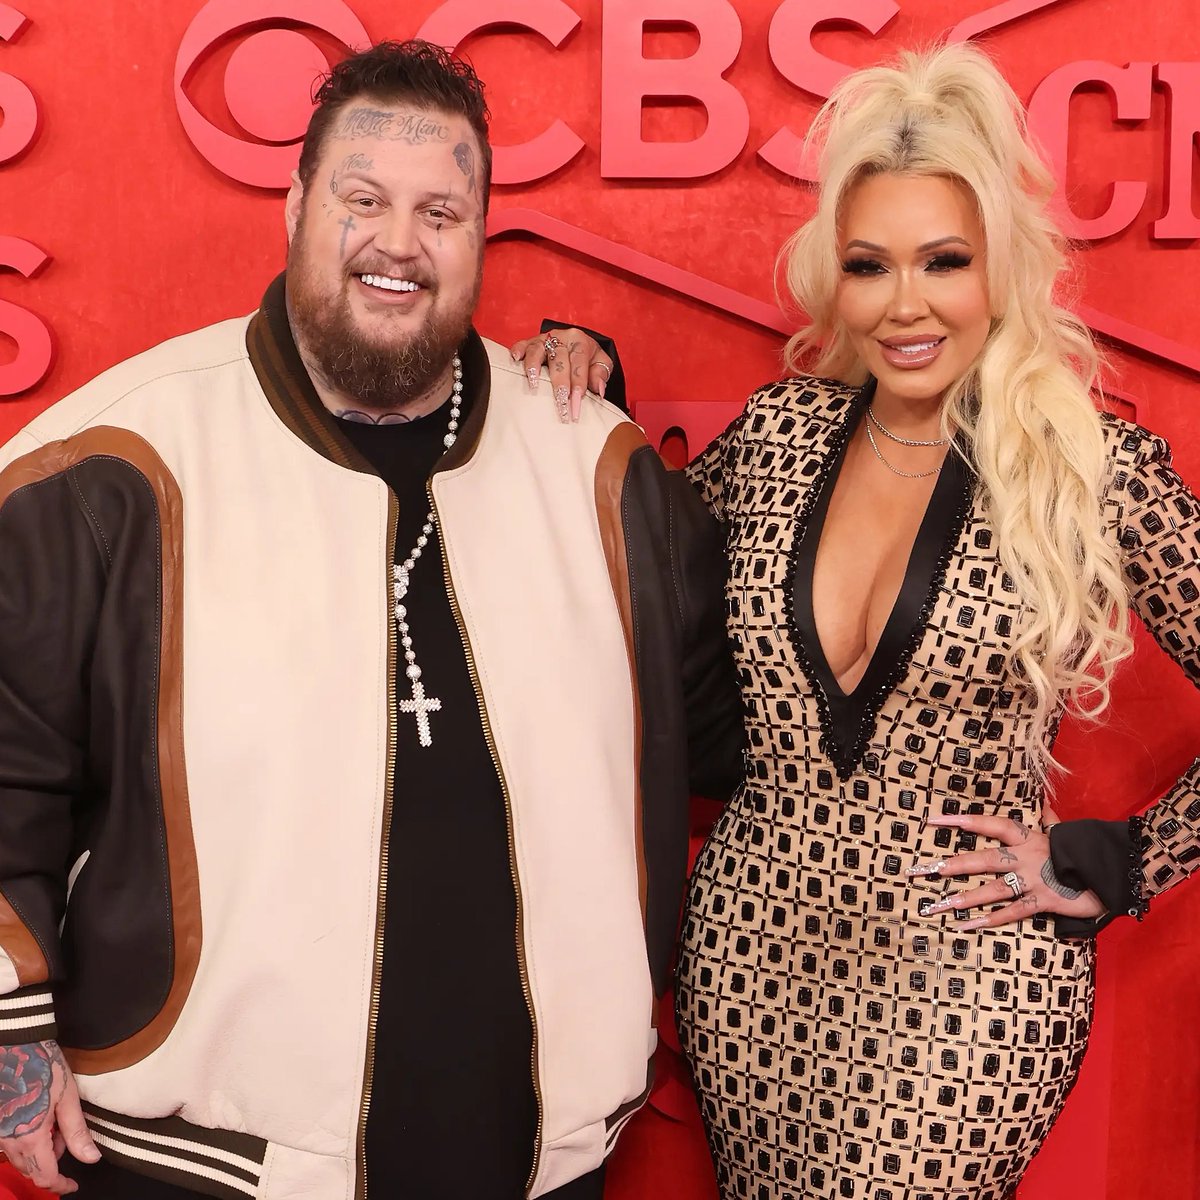 Bunnie Xo, Jelly Roll's wife, says the singer has taken time away from the internet due to negative comments about his weight.

'My husband got off the internet because he is so tired of being bullied about his f*cking weight.'